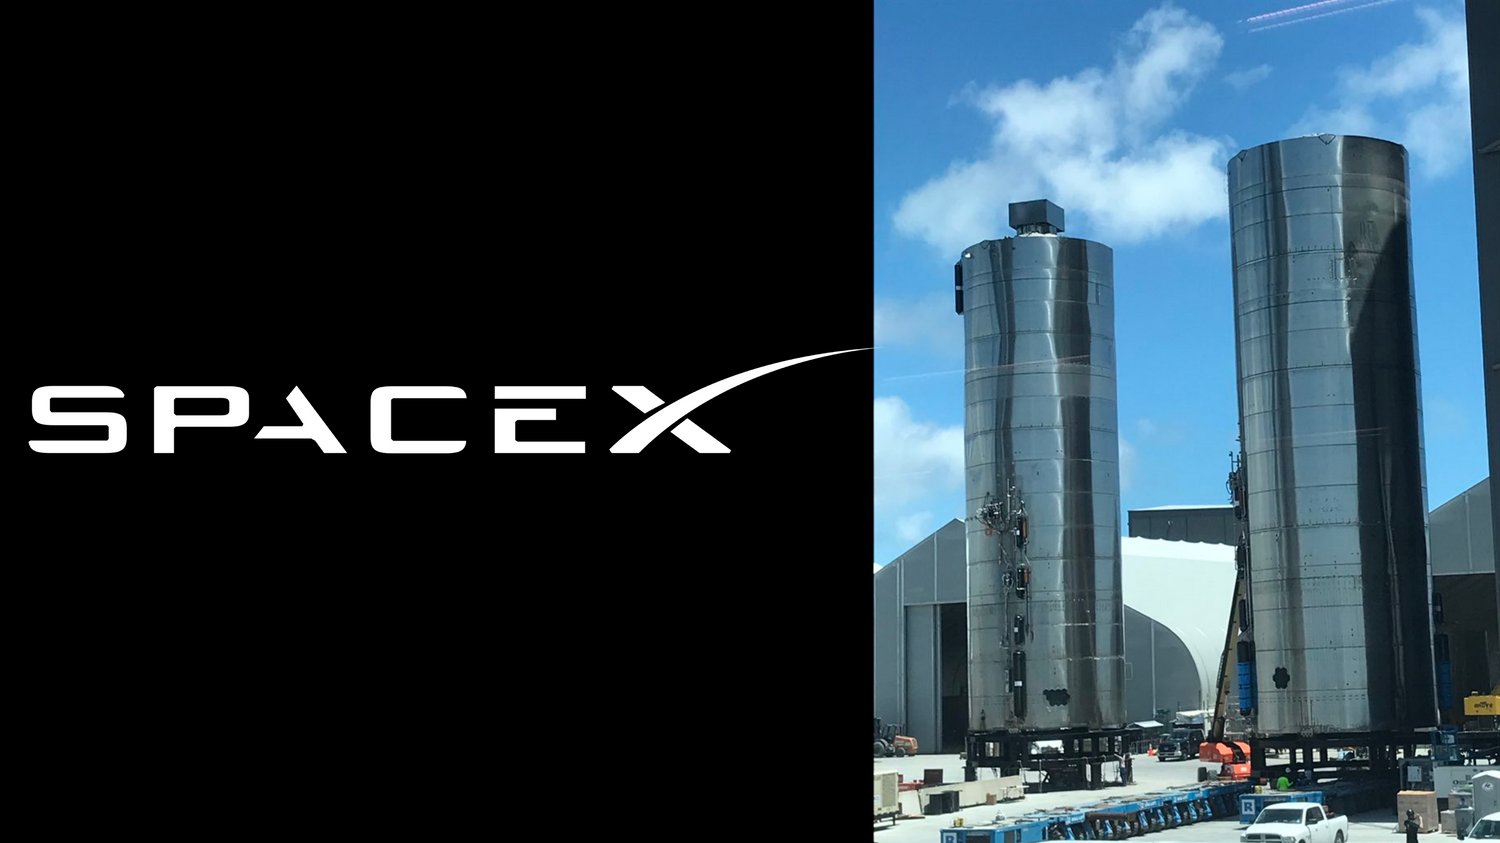 SpaceX transports next Starship to the launch pad to prepare it for flight